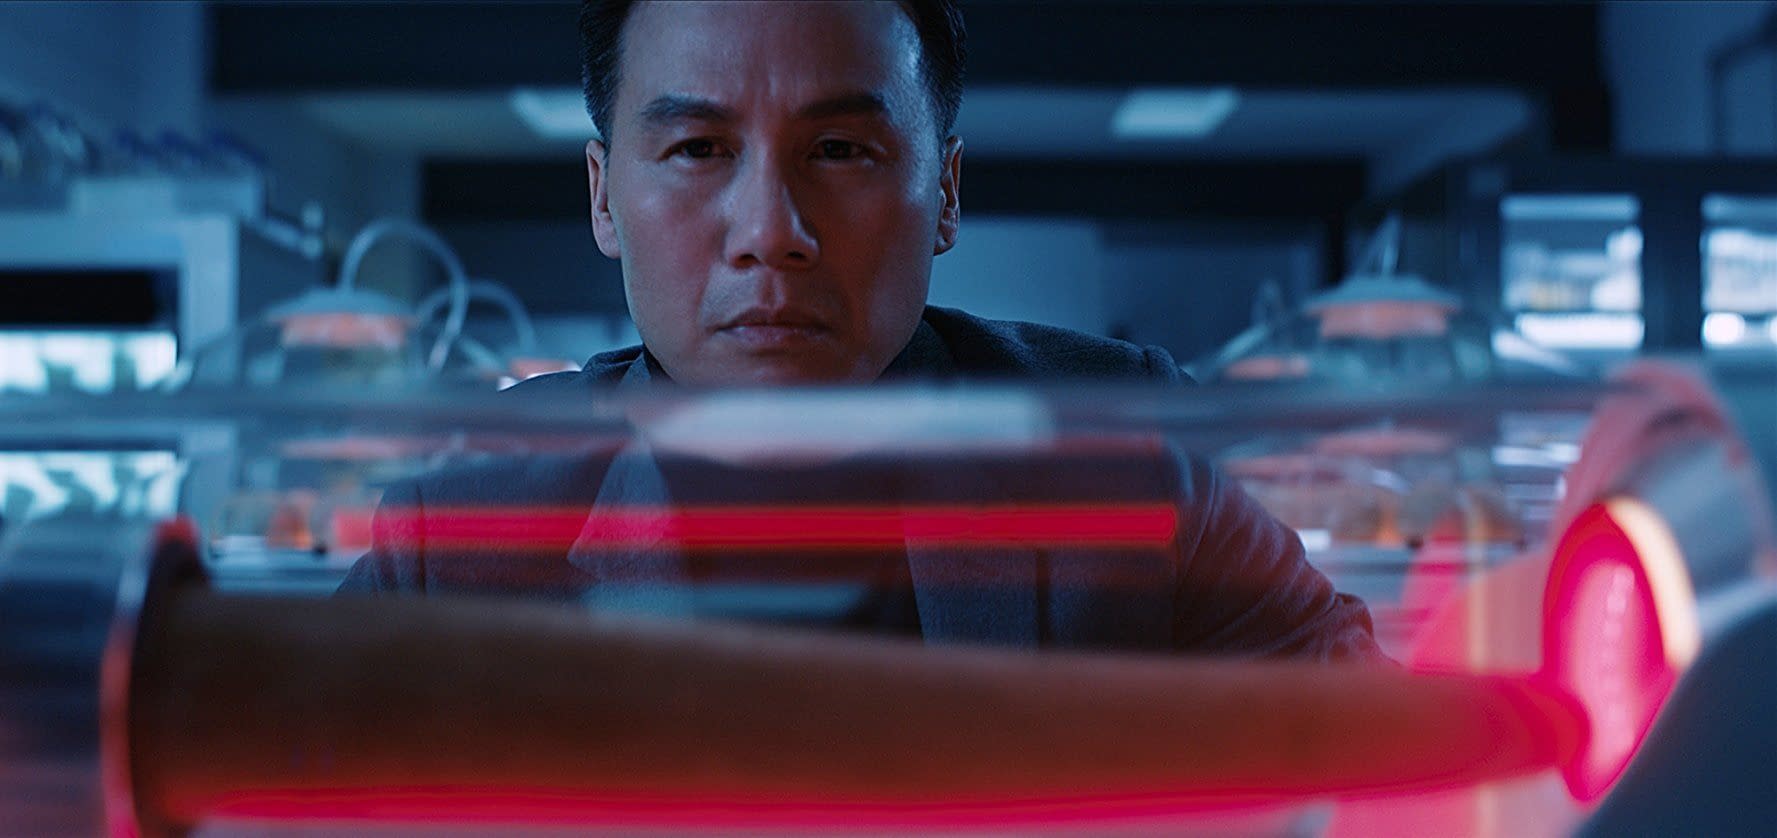 BD Wong Thinks it's Reductive to call his 'Jurassic World: Fallen Kingdom' Character a Villain